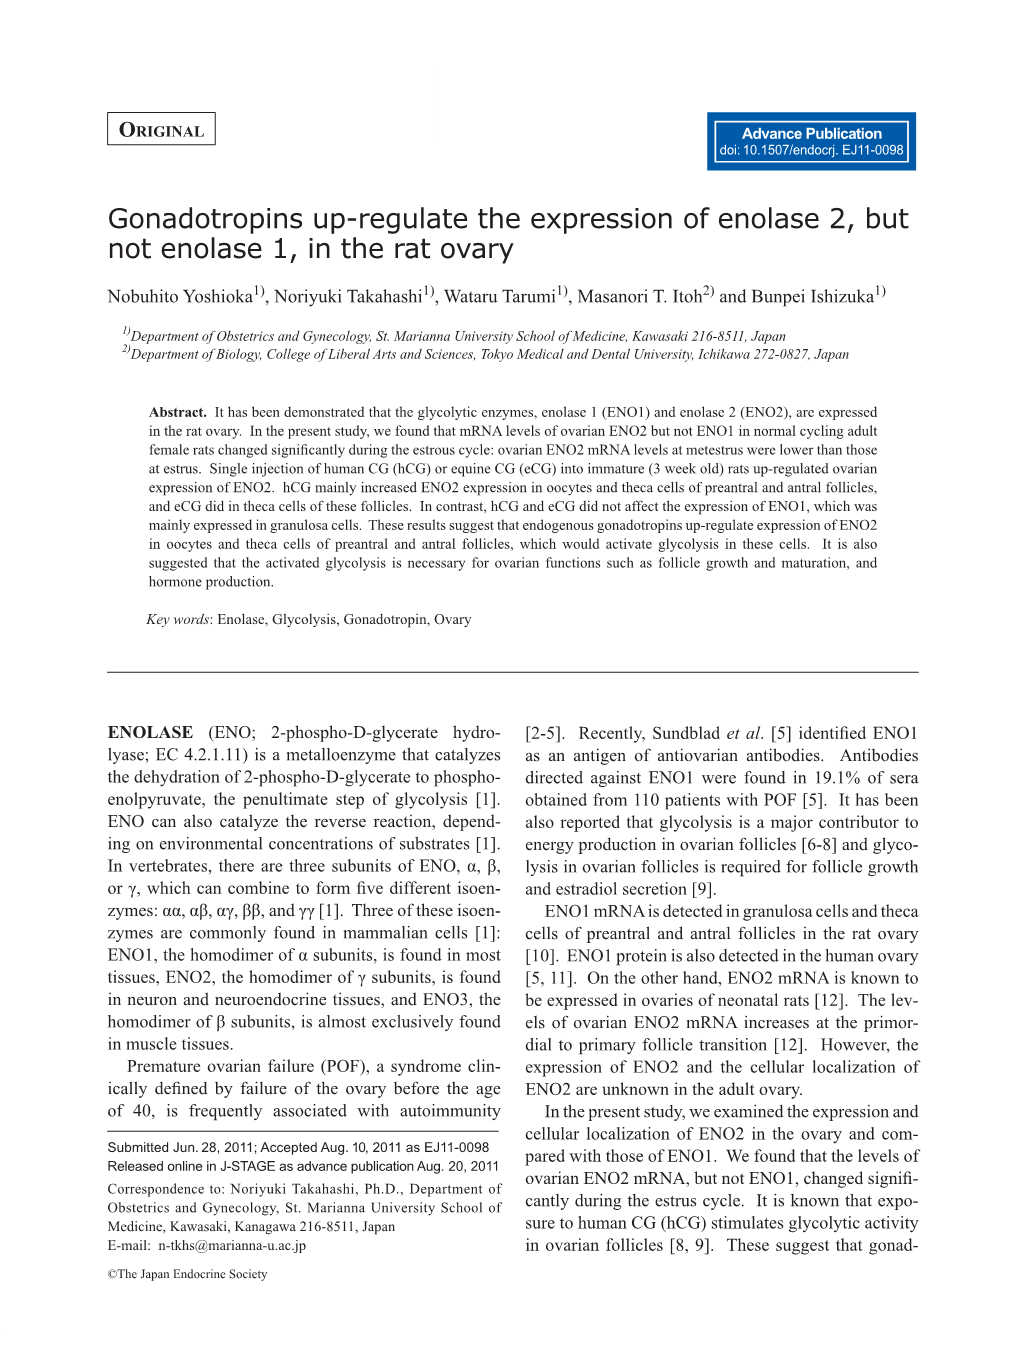 Gonadotropins Up-Regulate the Expression of Enolase 2, but Not Enolase 1, in the Rat Ovary